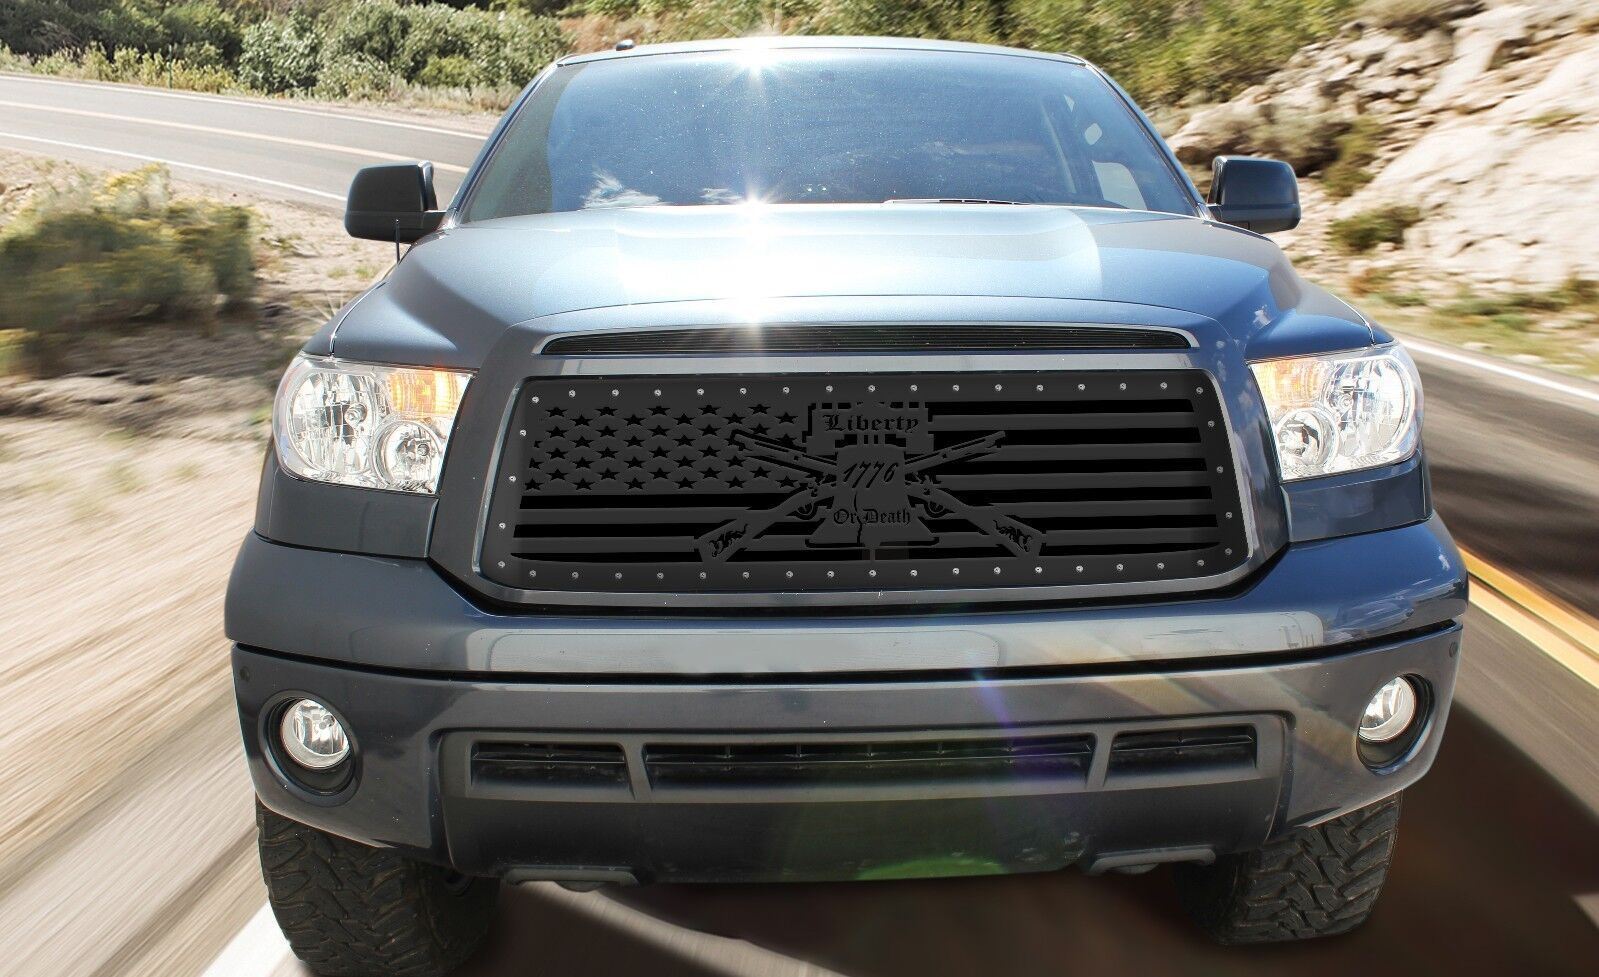 Custom Aftermarket Steel Grille Kit for 2010-2013 Toyota Tundra LIBERTY OR DEATH